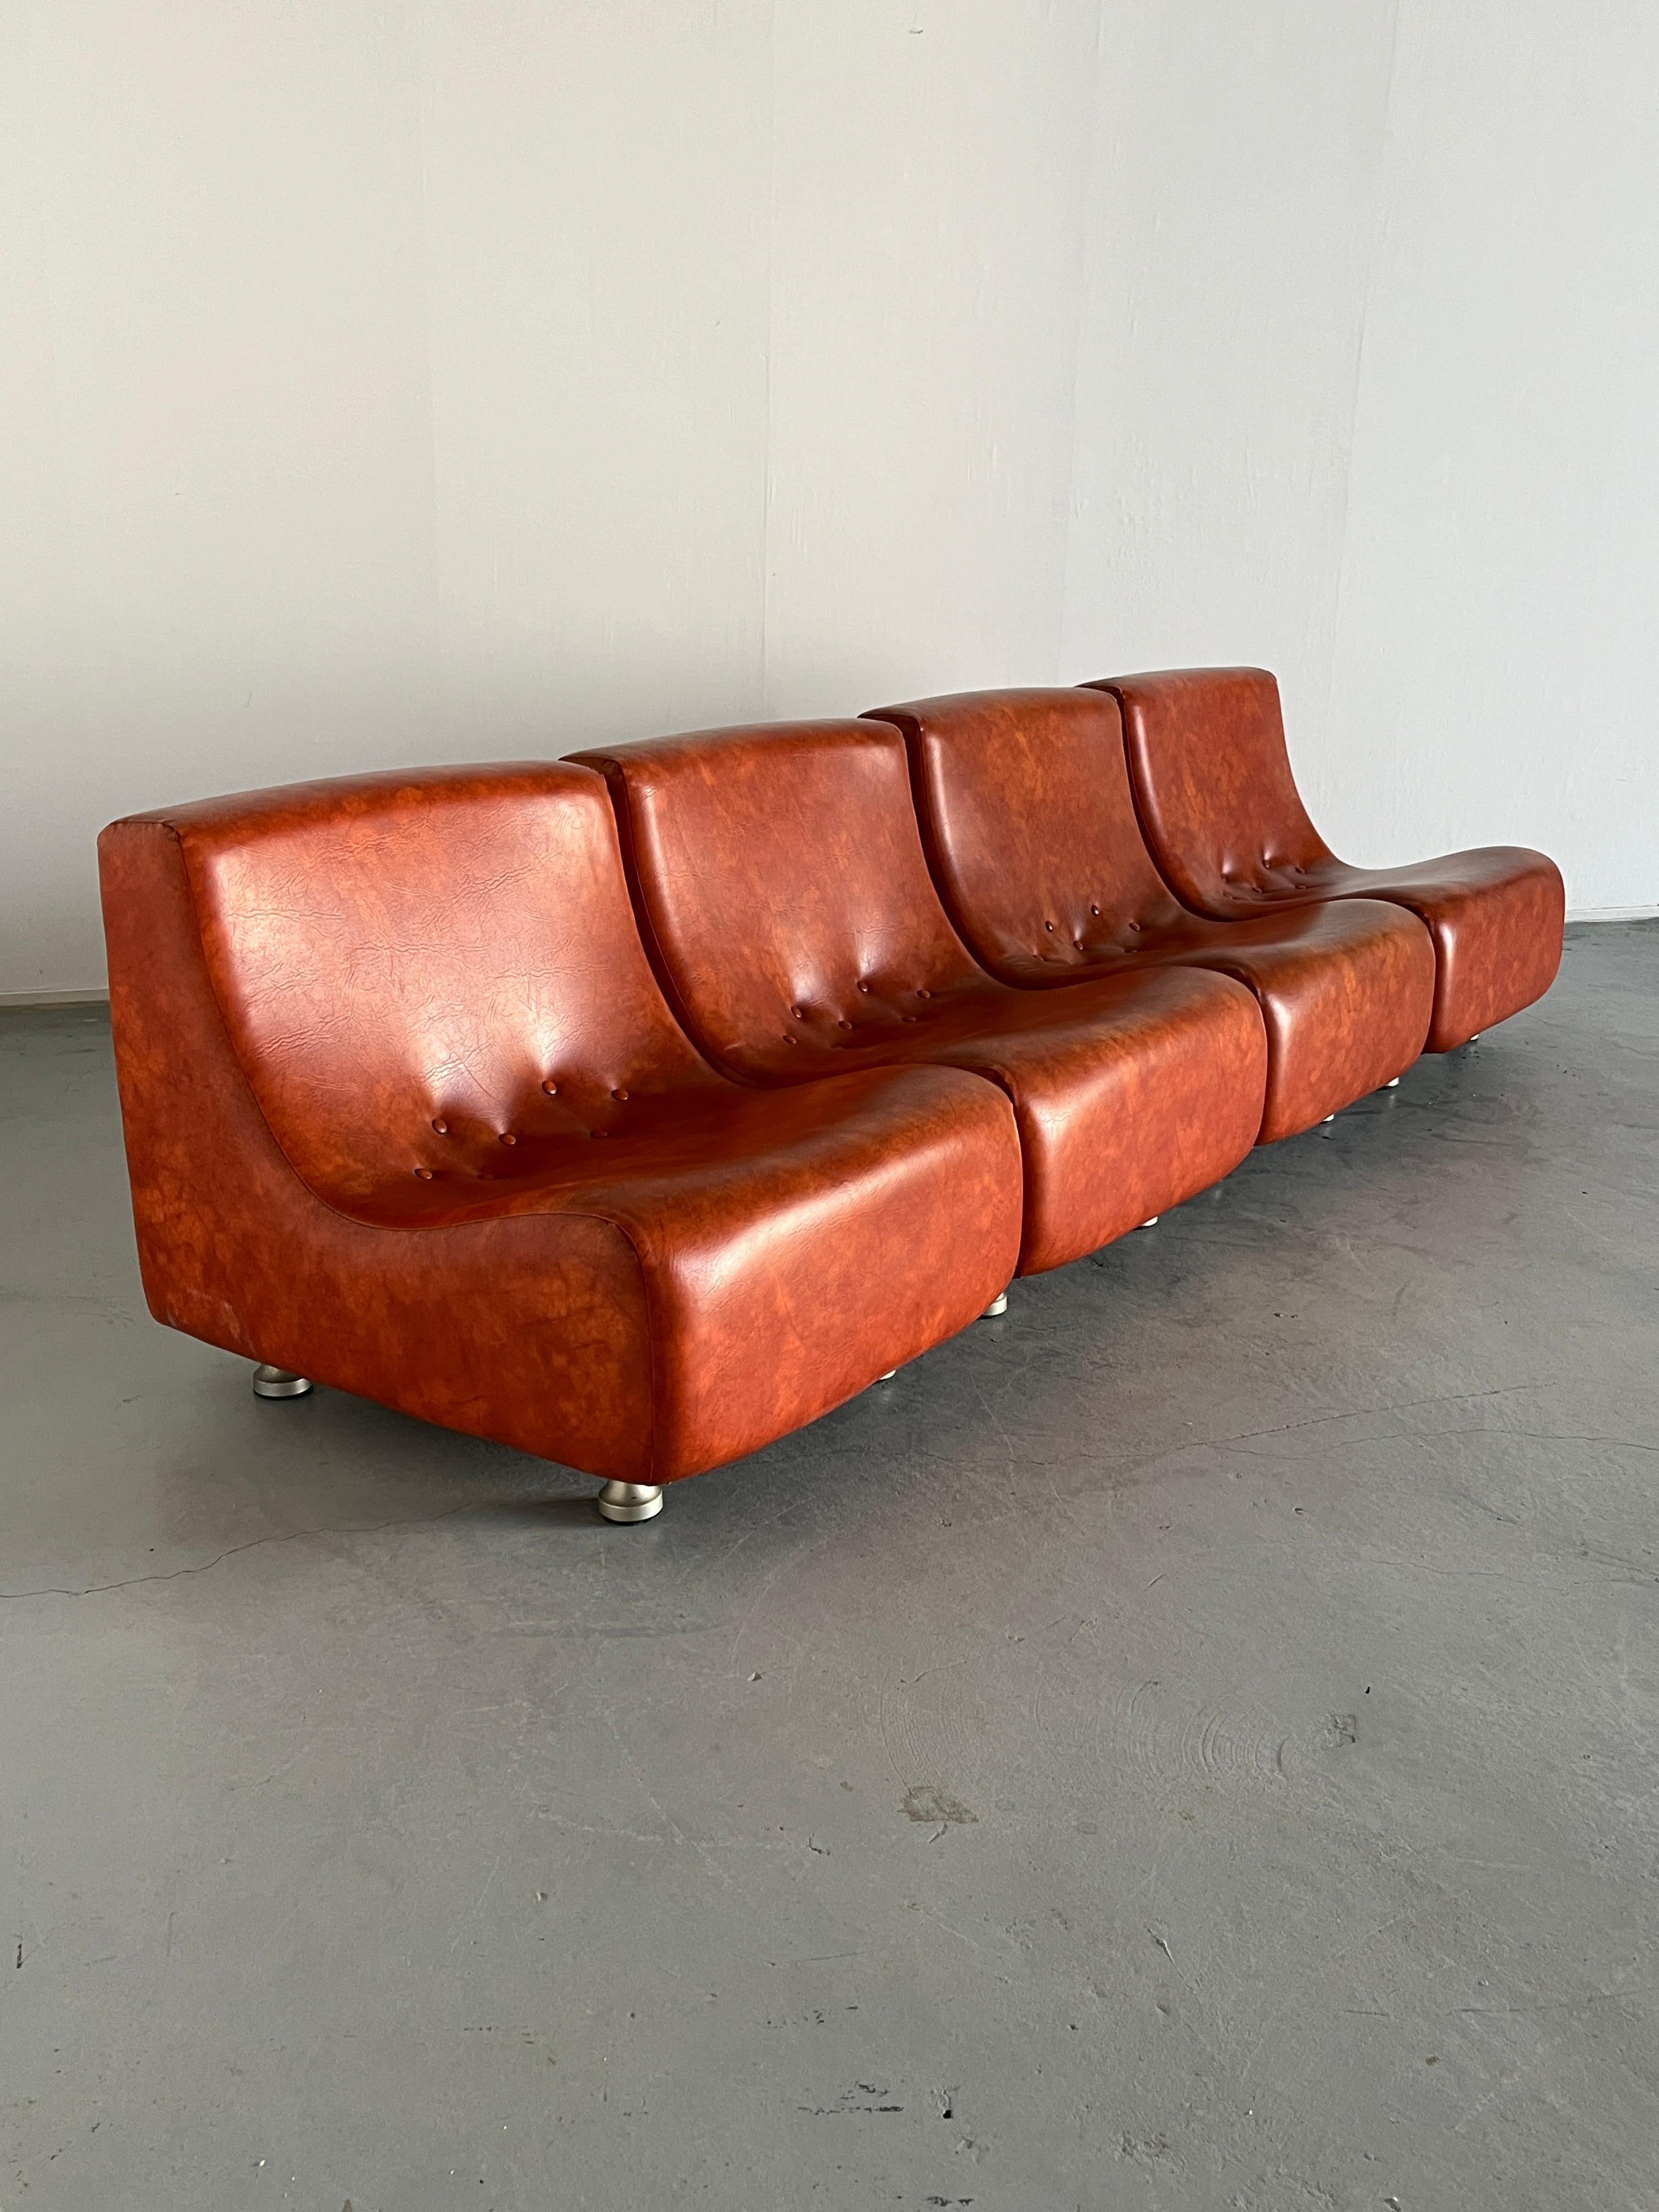 Late 20th Century Vintage Italian Space Age Modular Sofa, Faux Leather, in Style of COR, 70s Italy